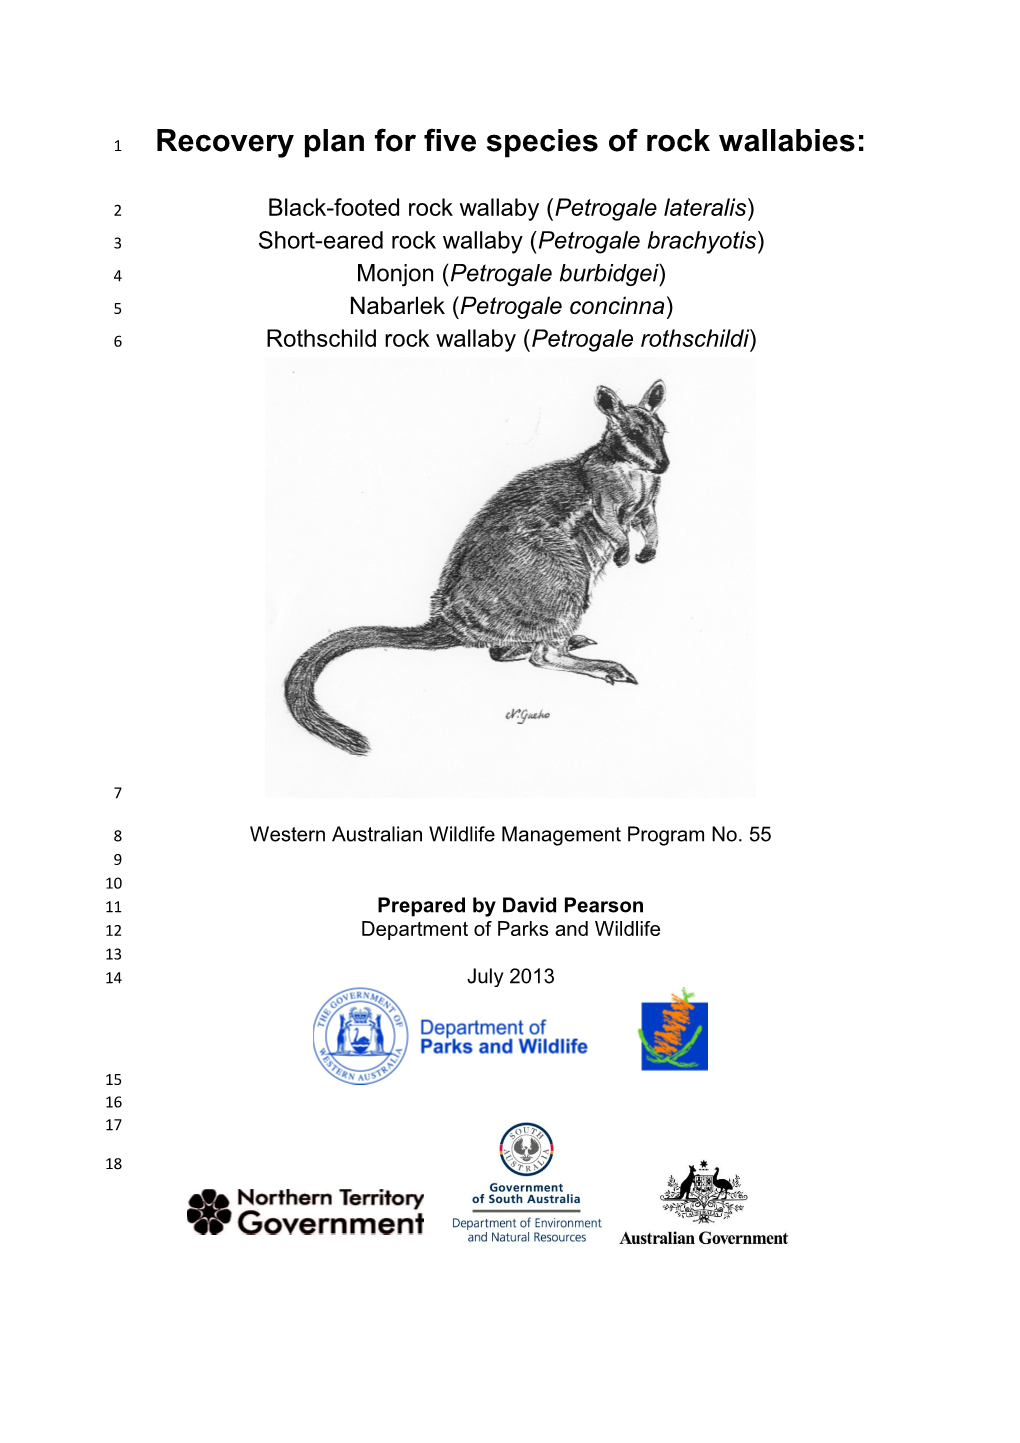 Recovery Plan for Five Species of Rock-Wallabies